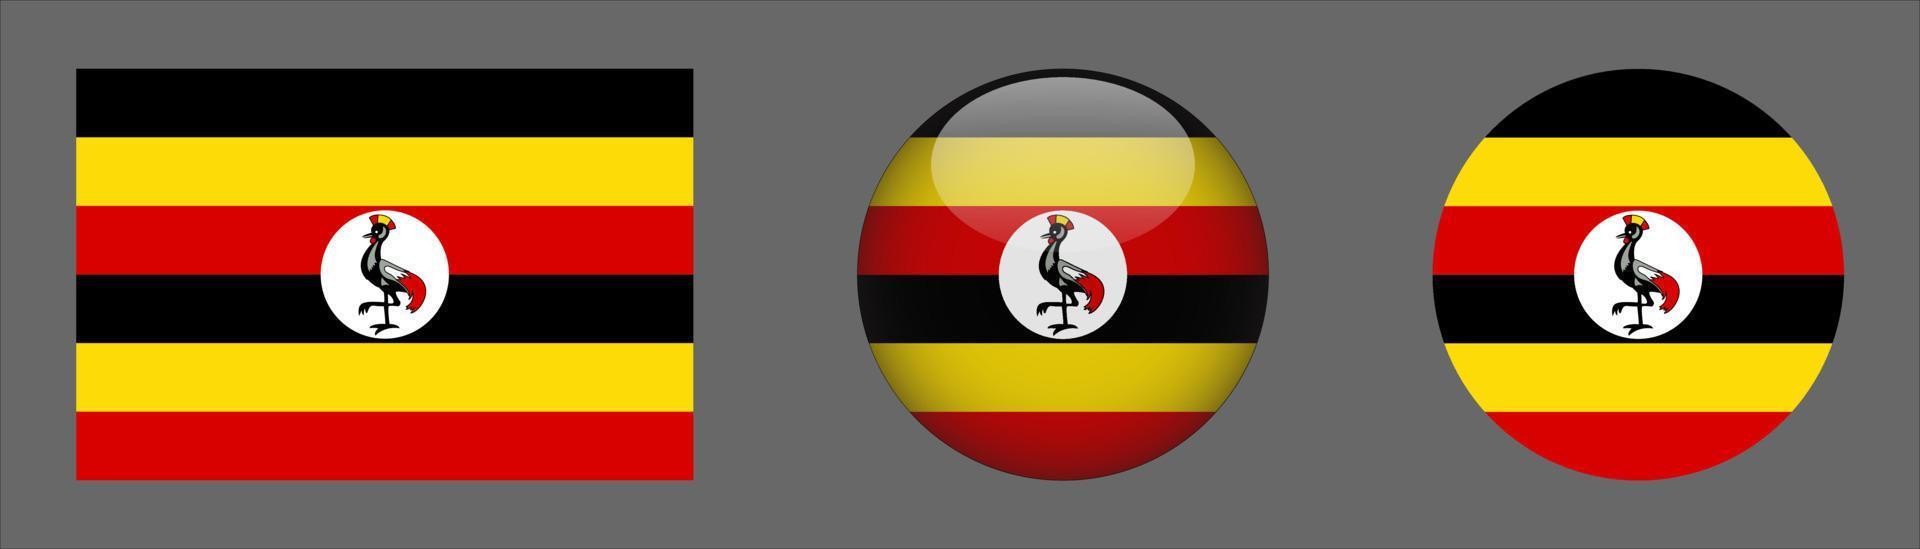 Uganda Flag Set Collection, Original Size Ratio, 3D Rounded, Flat Rounded. vector